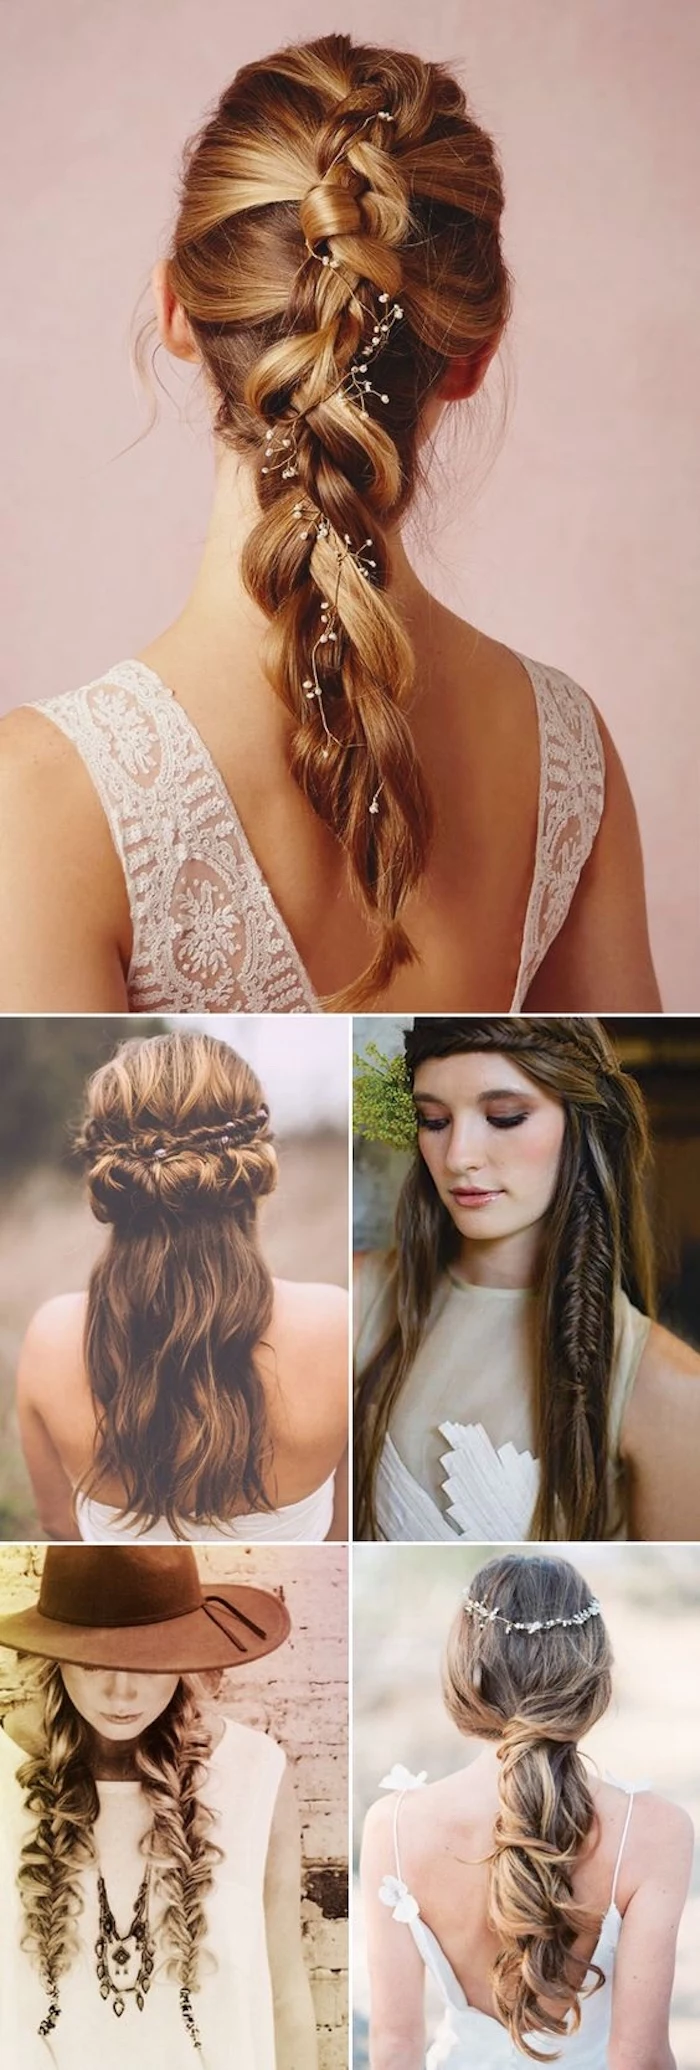 different hairstyles, blondes and brunettes, photo collage, box braids hairstyles, hair accessories